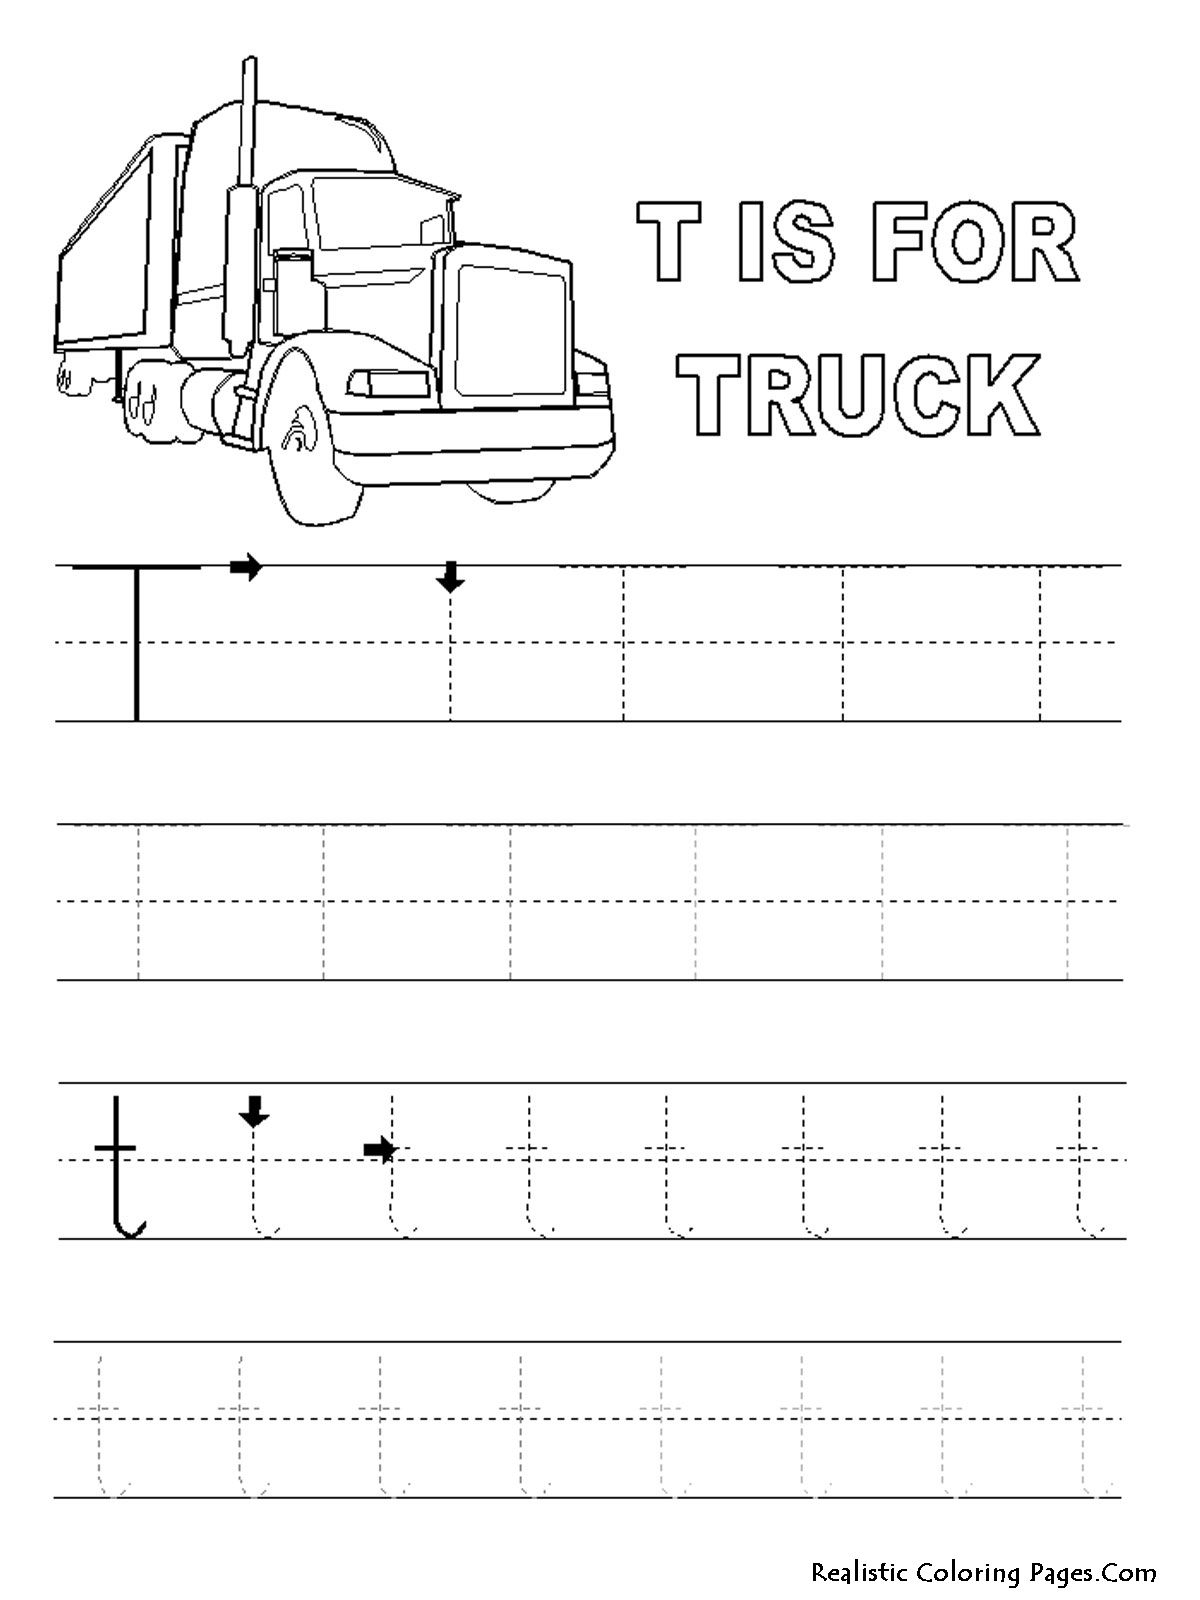 Letter T Worksheets And Coloring Pages For Preschoolers pertaining to Letter T Worksheets Printable